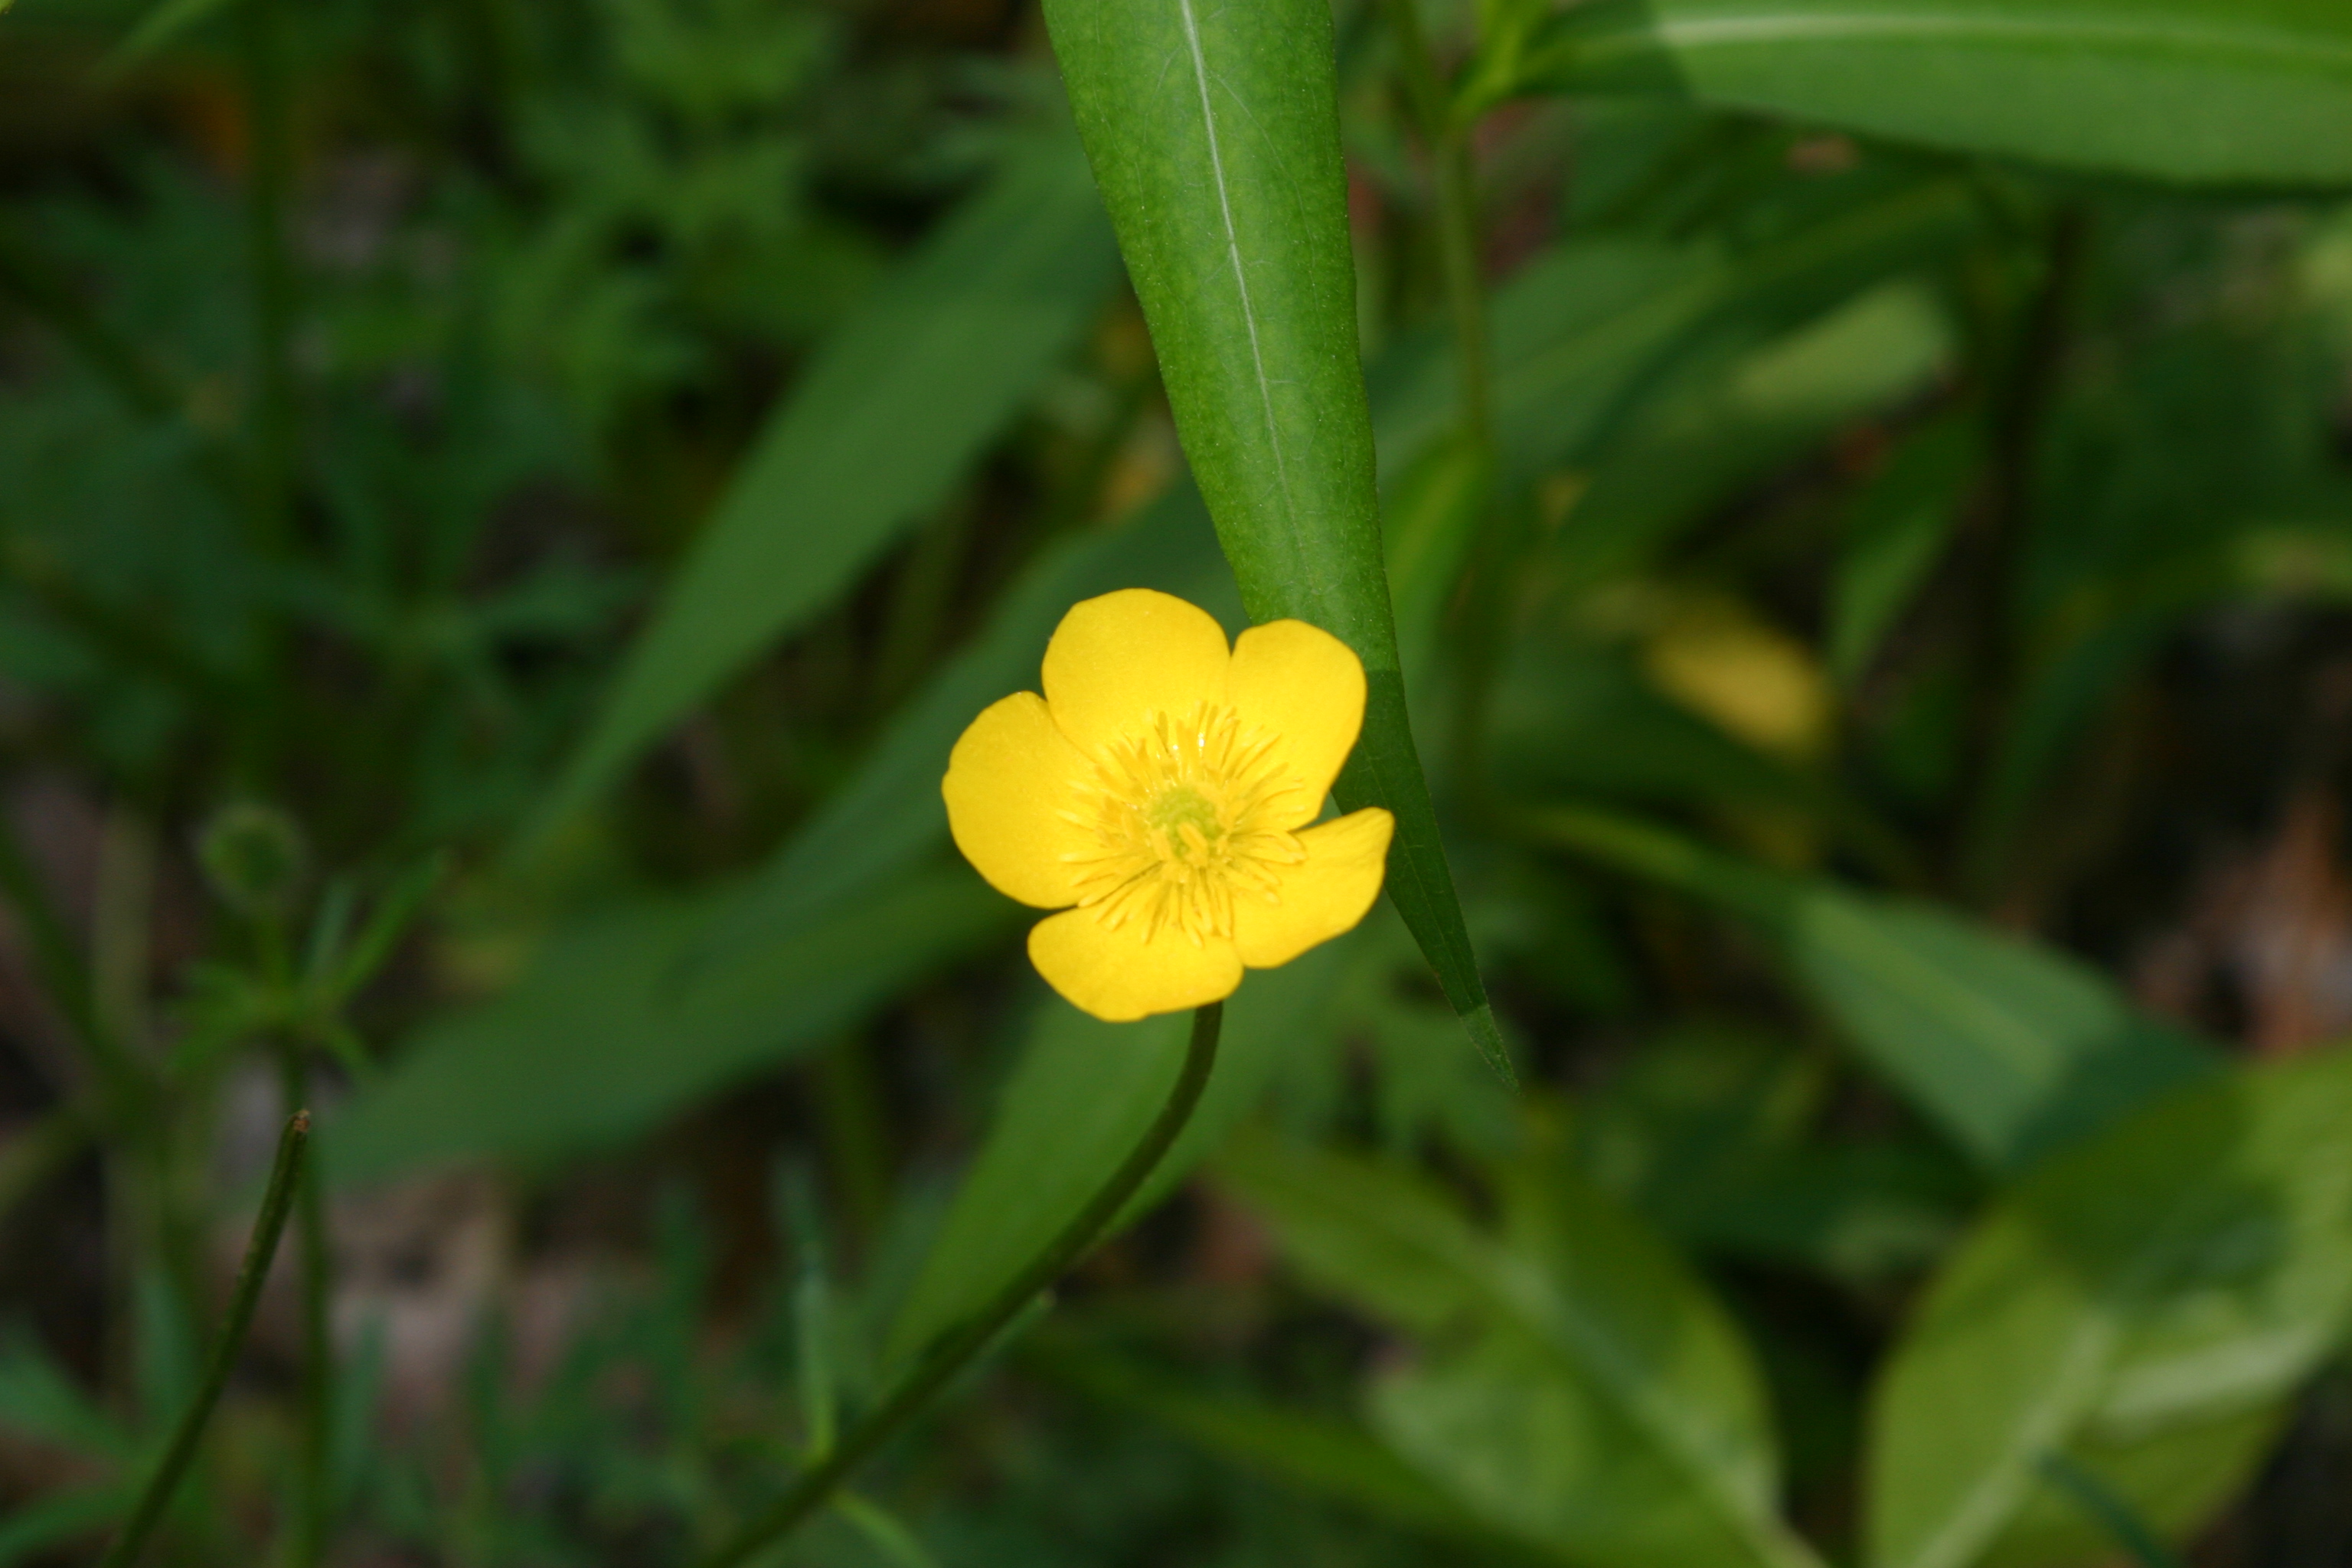 Flowers With Five Yellow Petals Recurved Style On Seed Head Ranunculus Bulbosus L